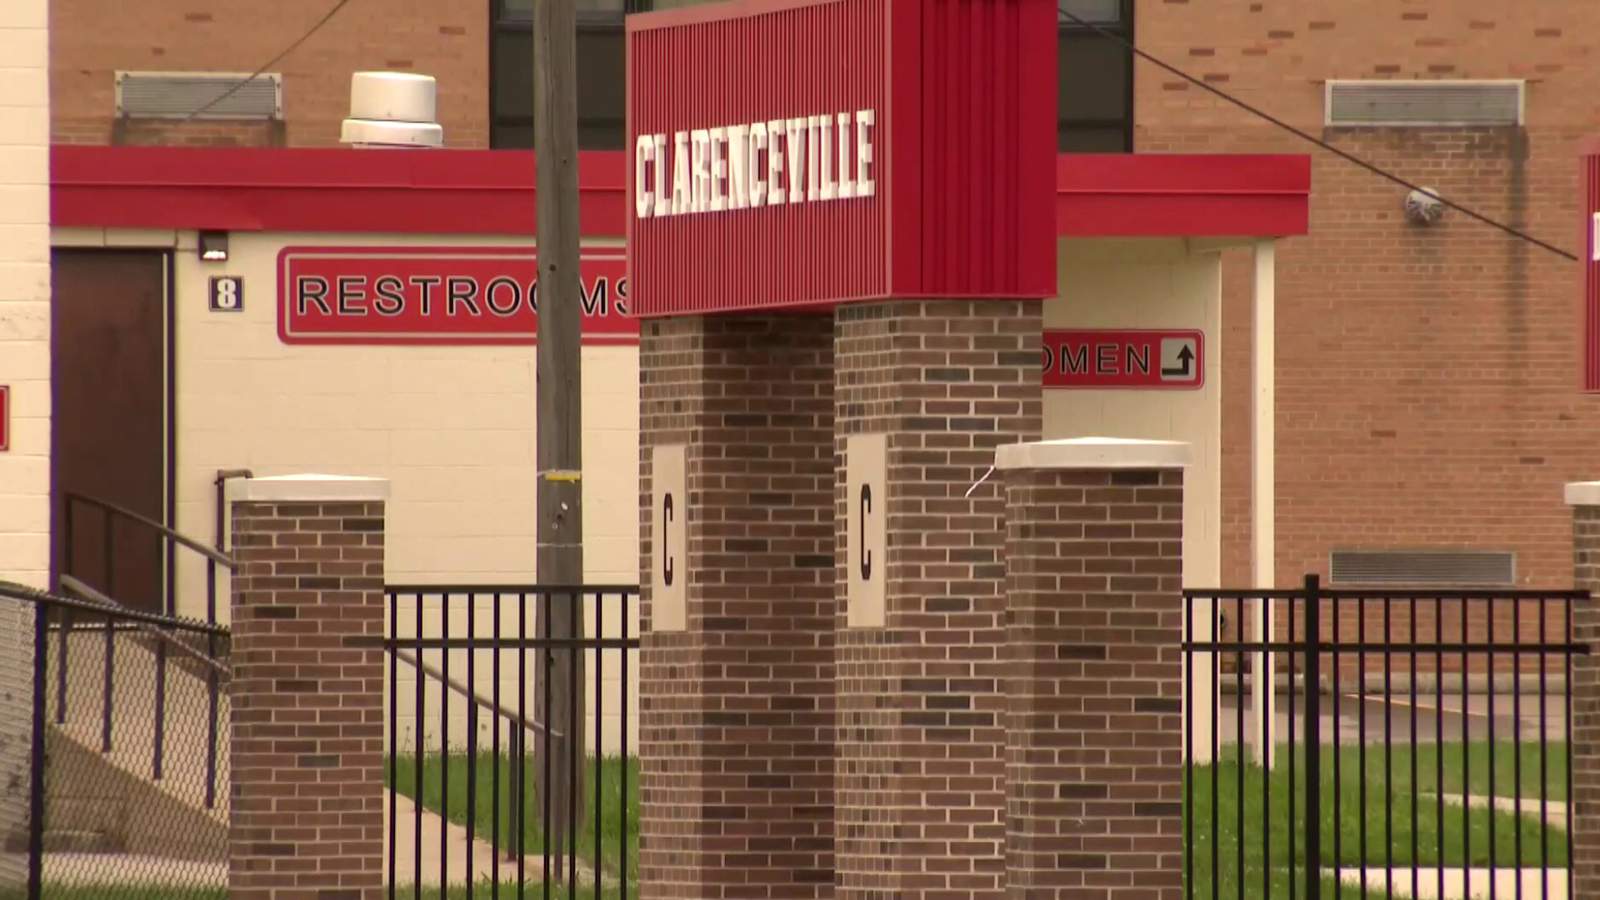 We need justice: Former Clarenceville Middle School students say teacher sexually abused them